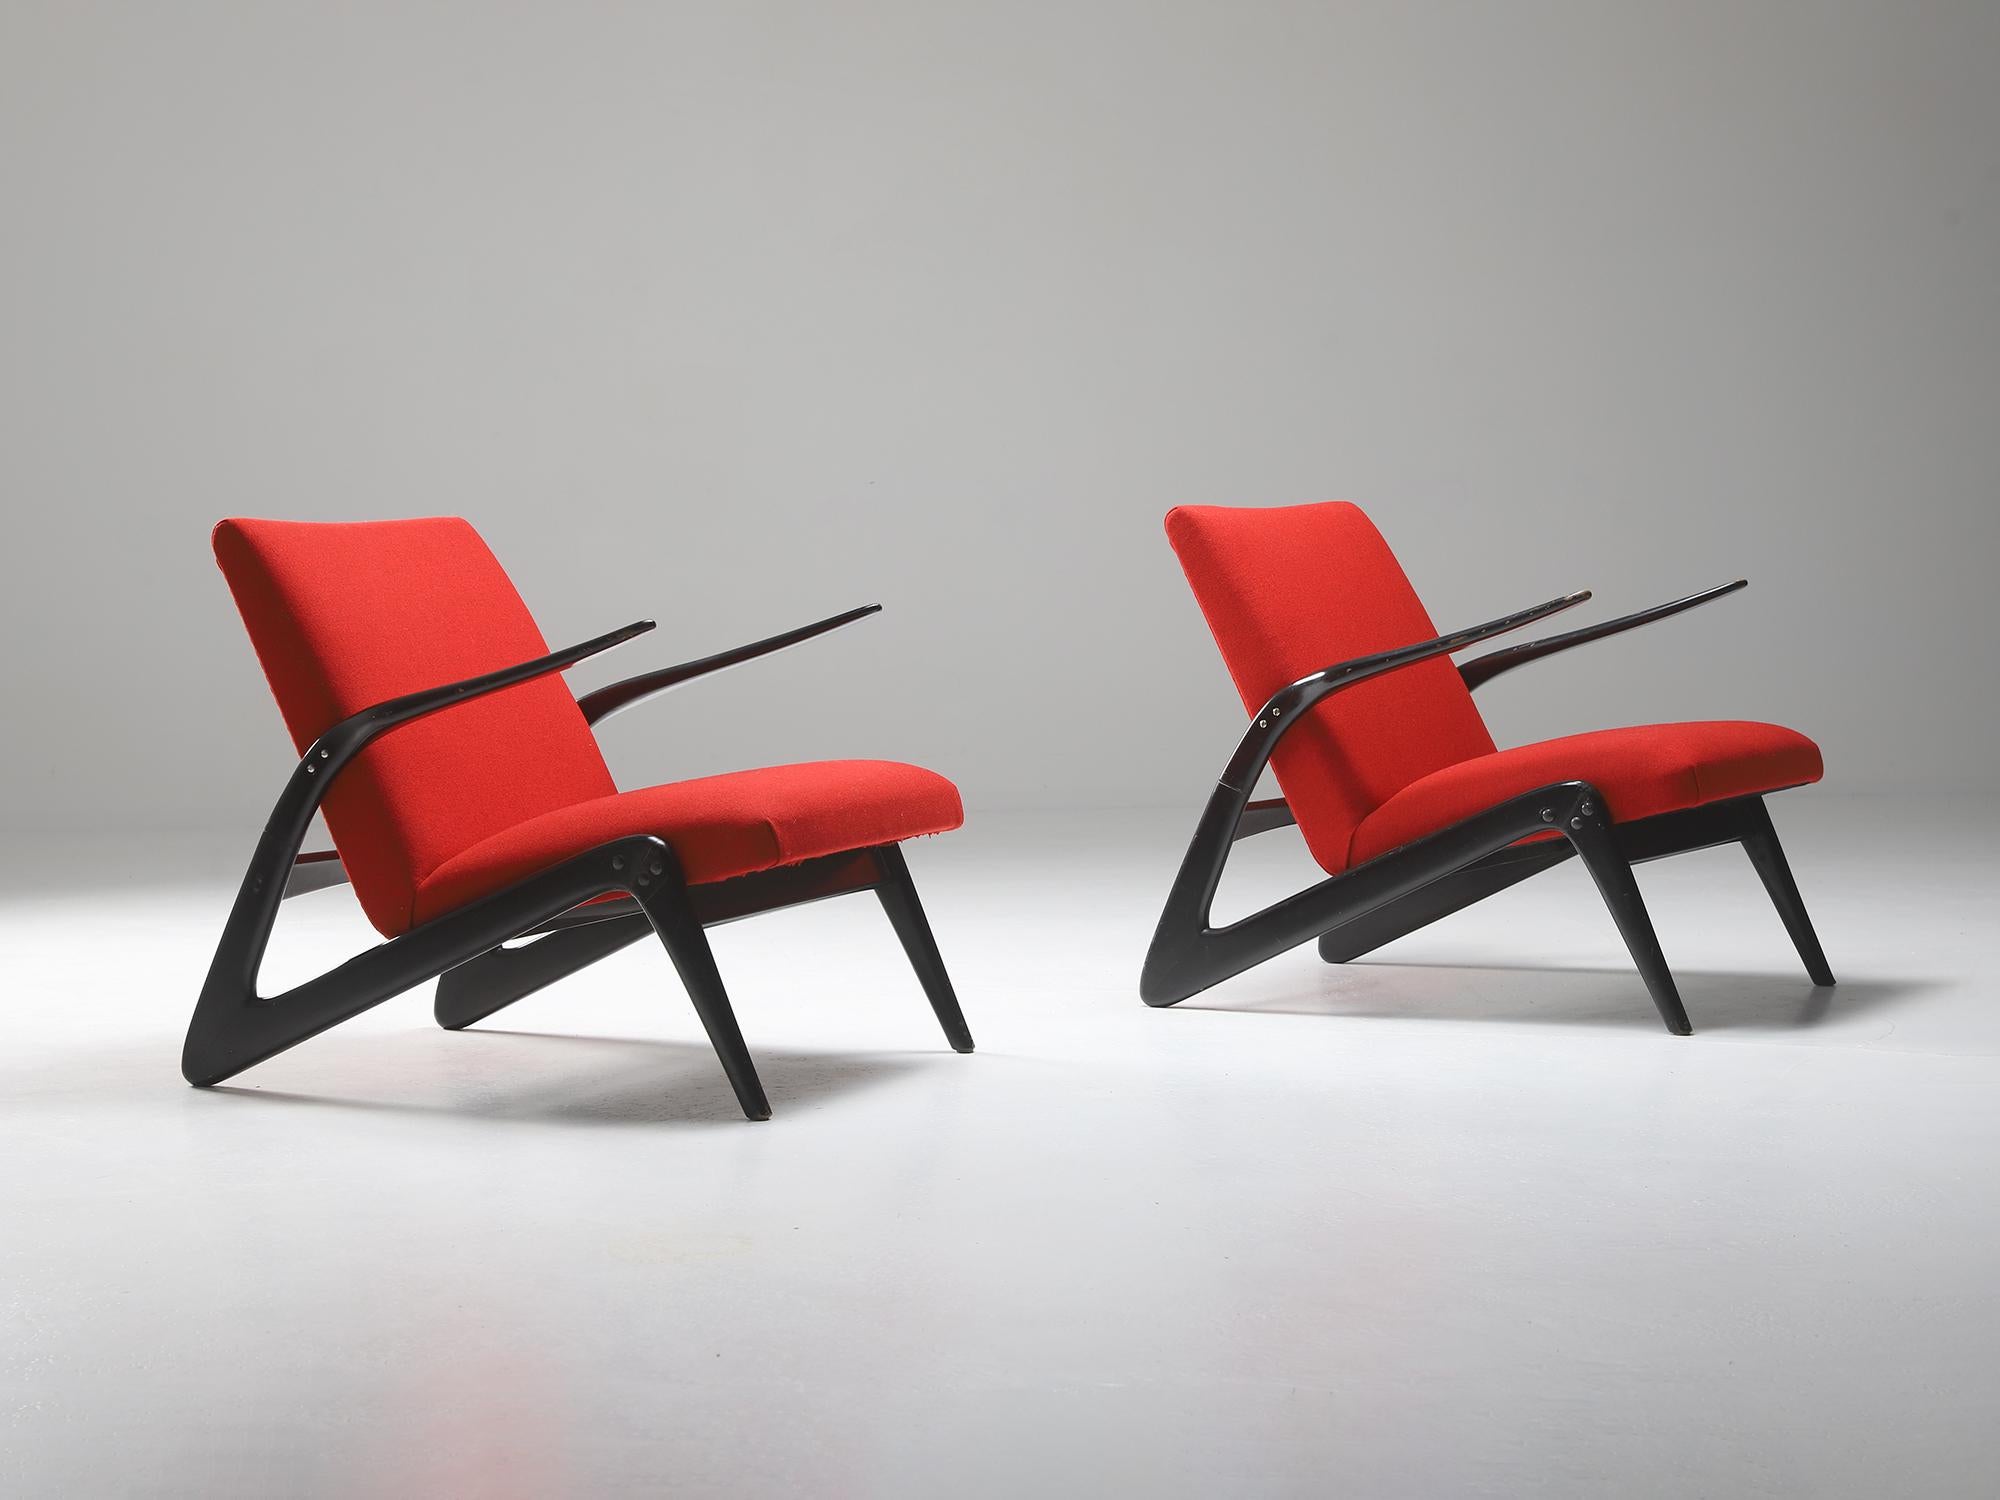 Find here a set of Alfred Hendrickx S6L chairs, that has become difficult to find here in Belgium. It was first presented with other Belform furniture in 1958 at the world expo in Brussels. 

The design and construction of this chair is thoughtful